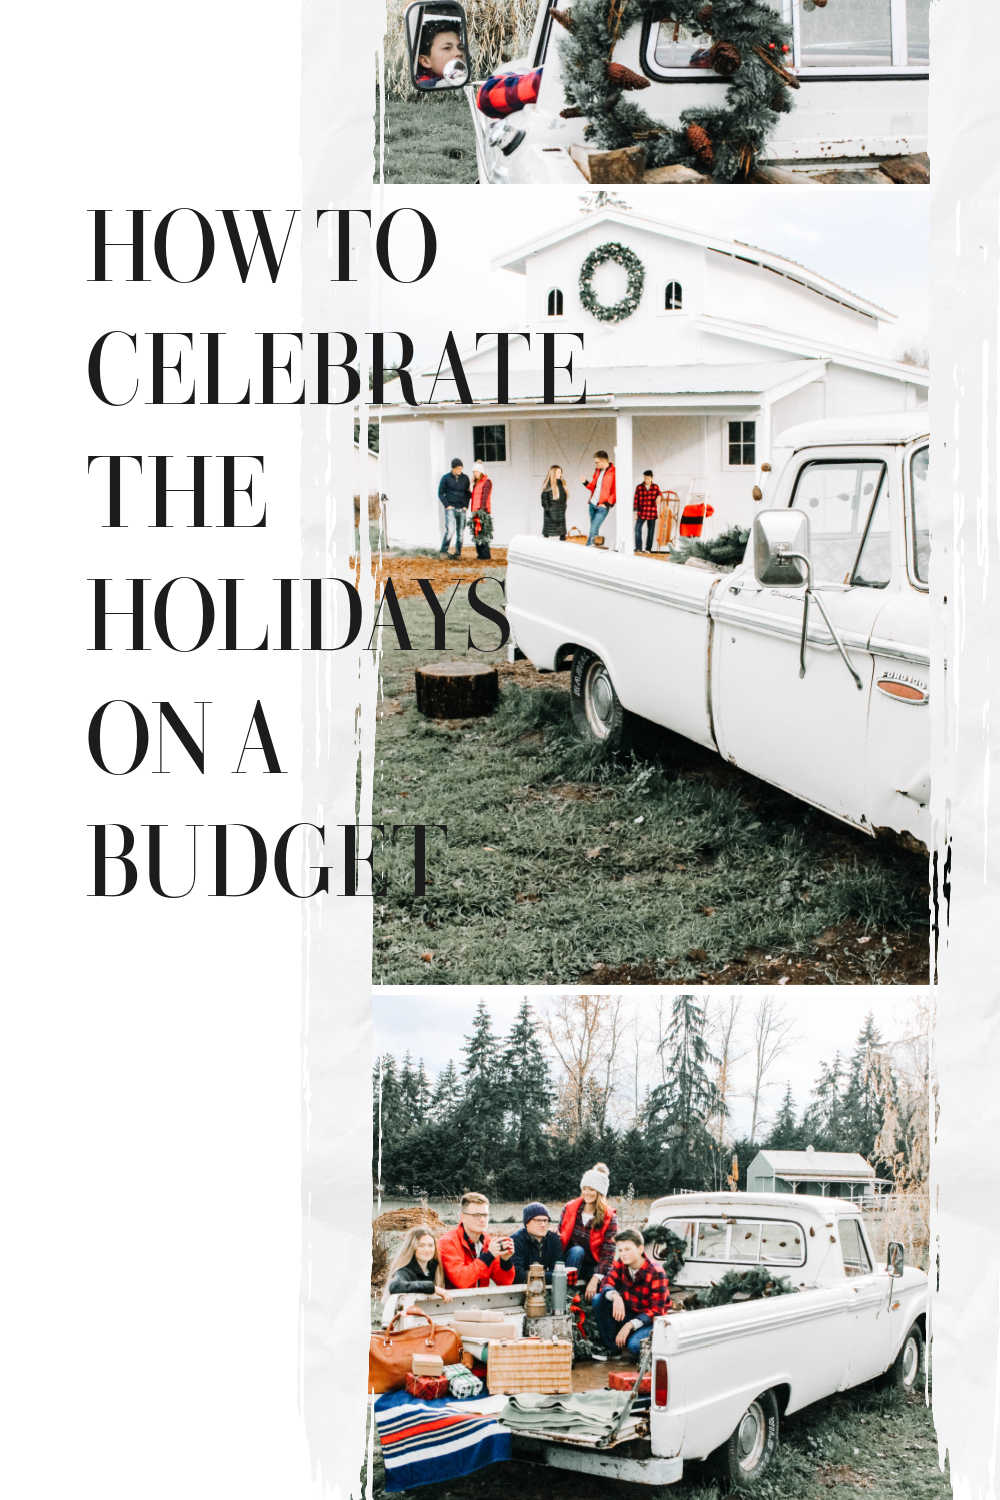 How to Celebrate the Holidays on a Budget